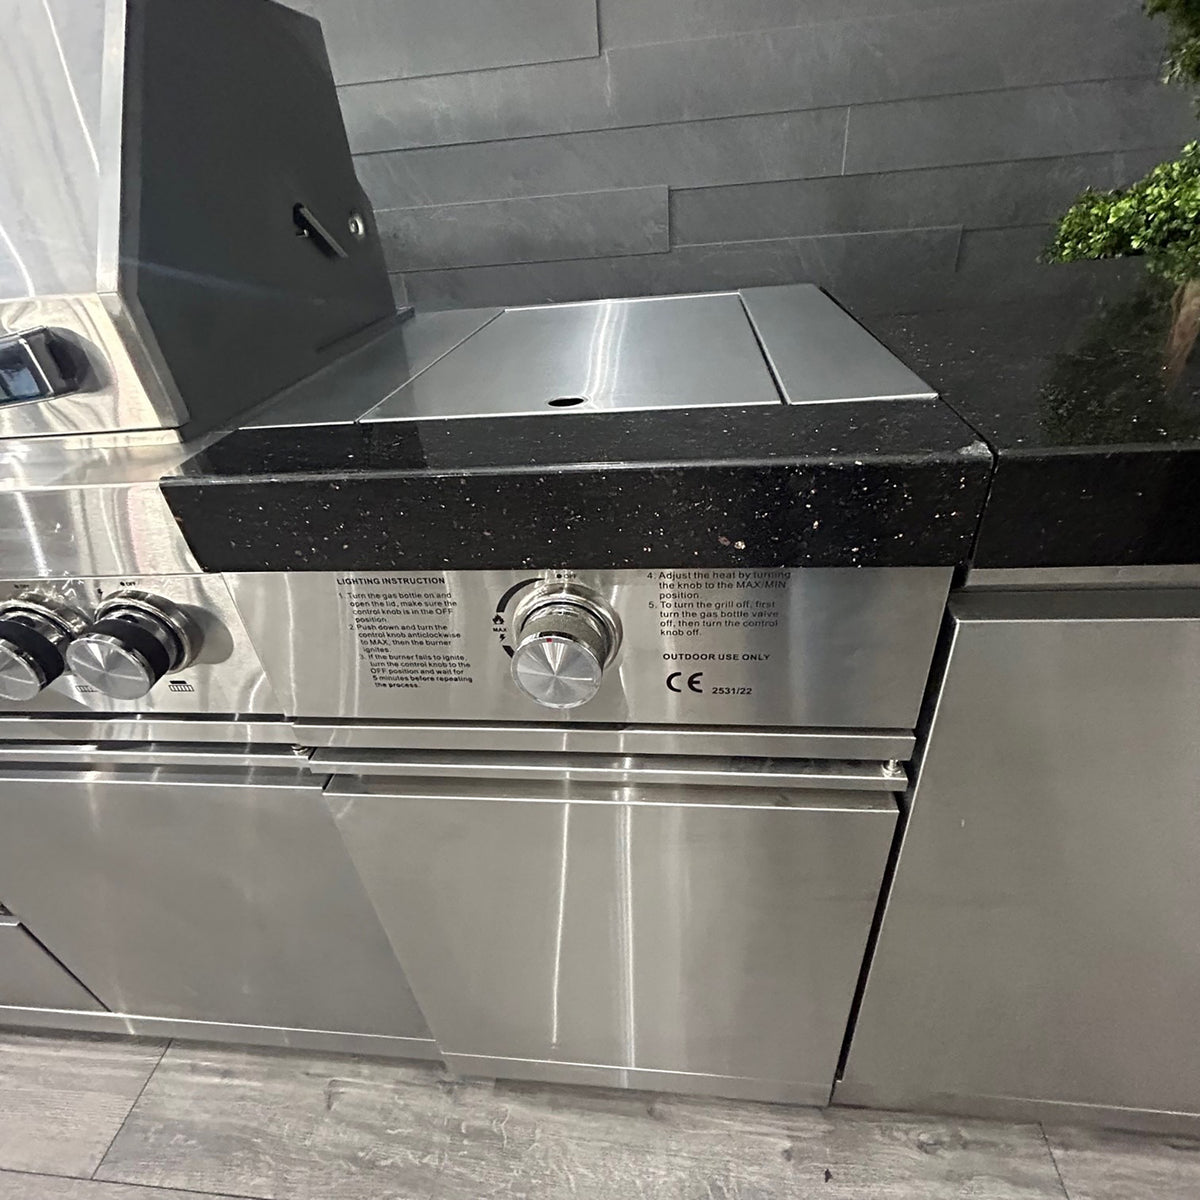 Ex Display Draco Grills 6 Burner Stainless Steel Outdoor Kitchen with Sear Station, Sink and Fridge Unit, Double Door Unit and Single Door Unit